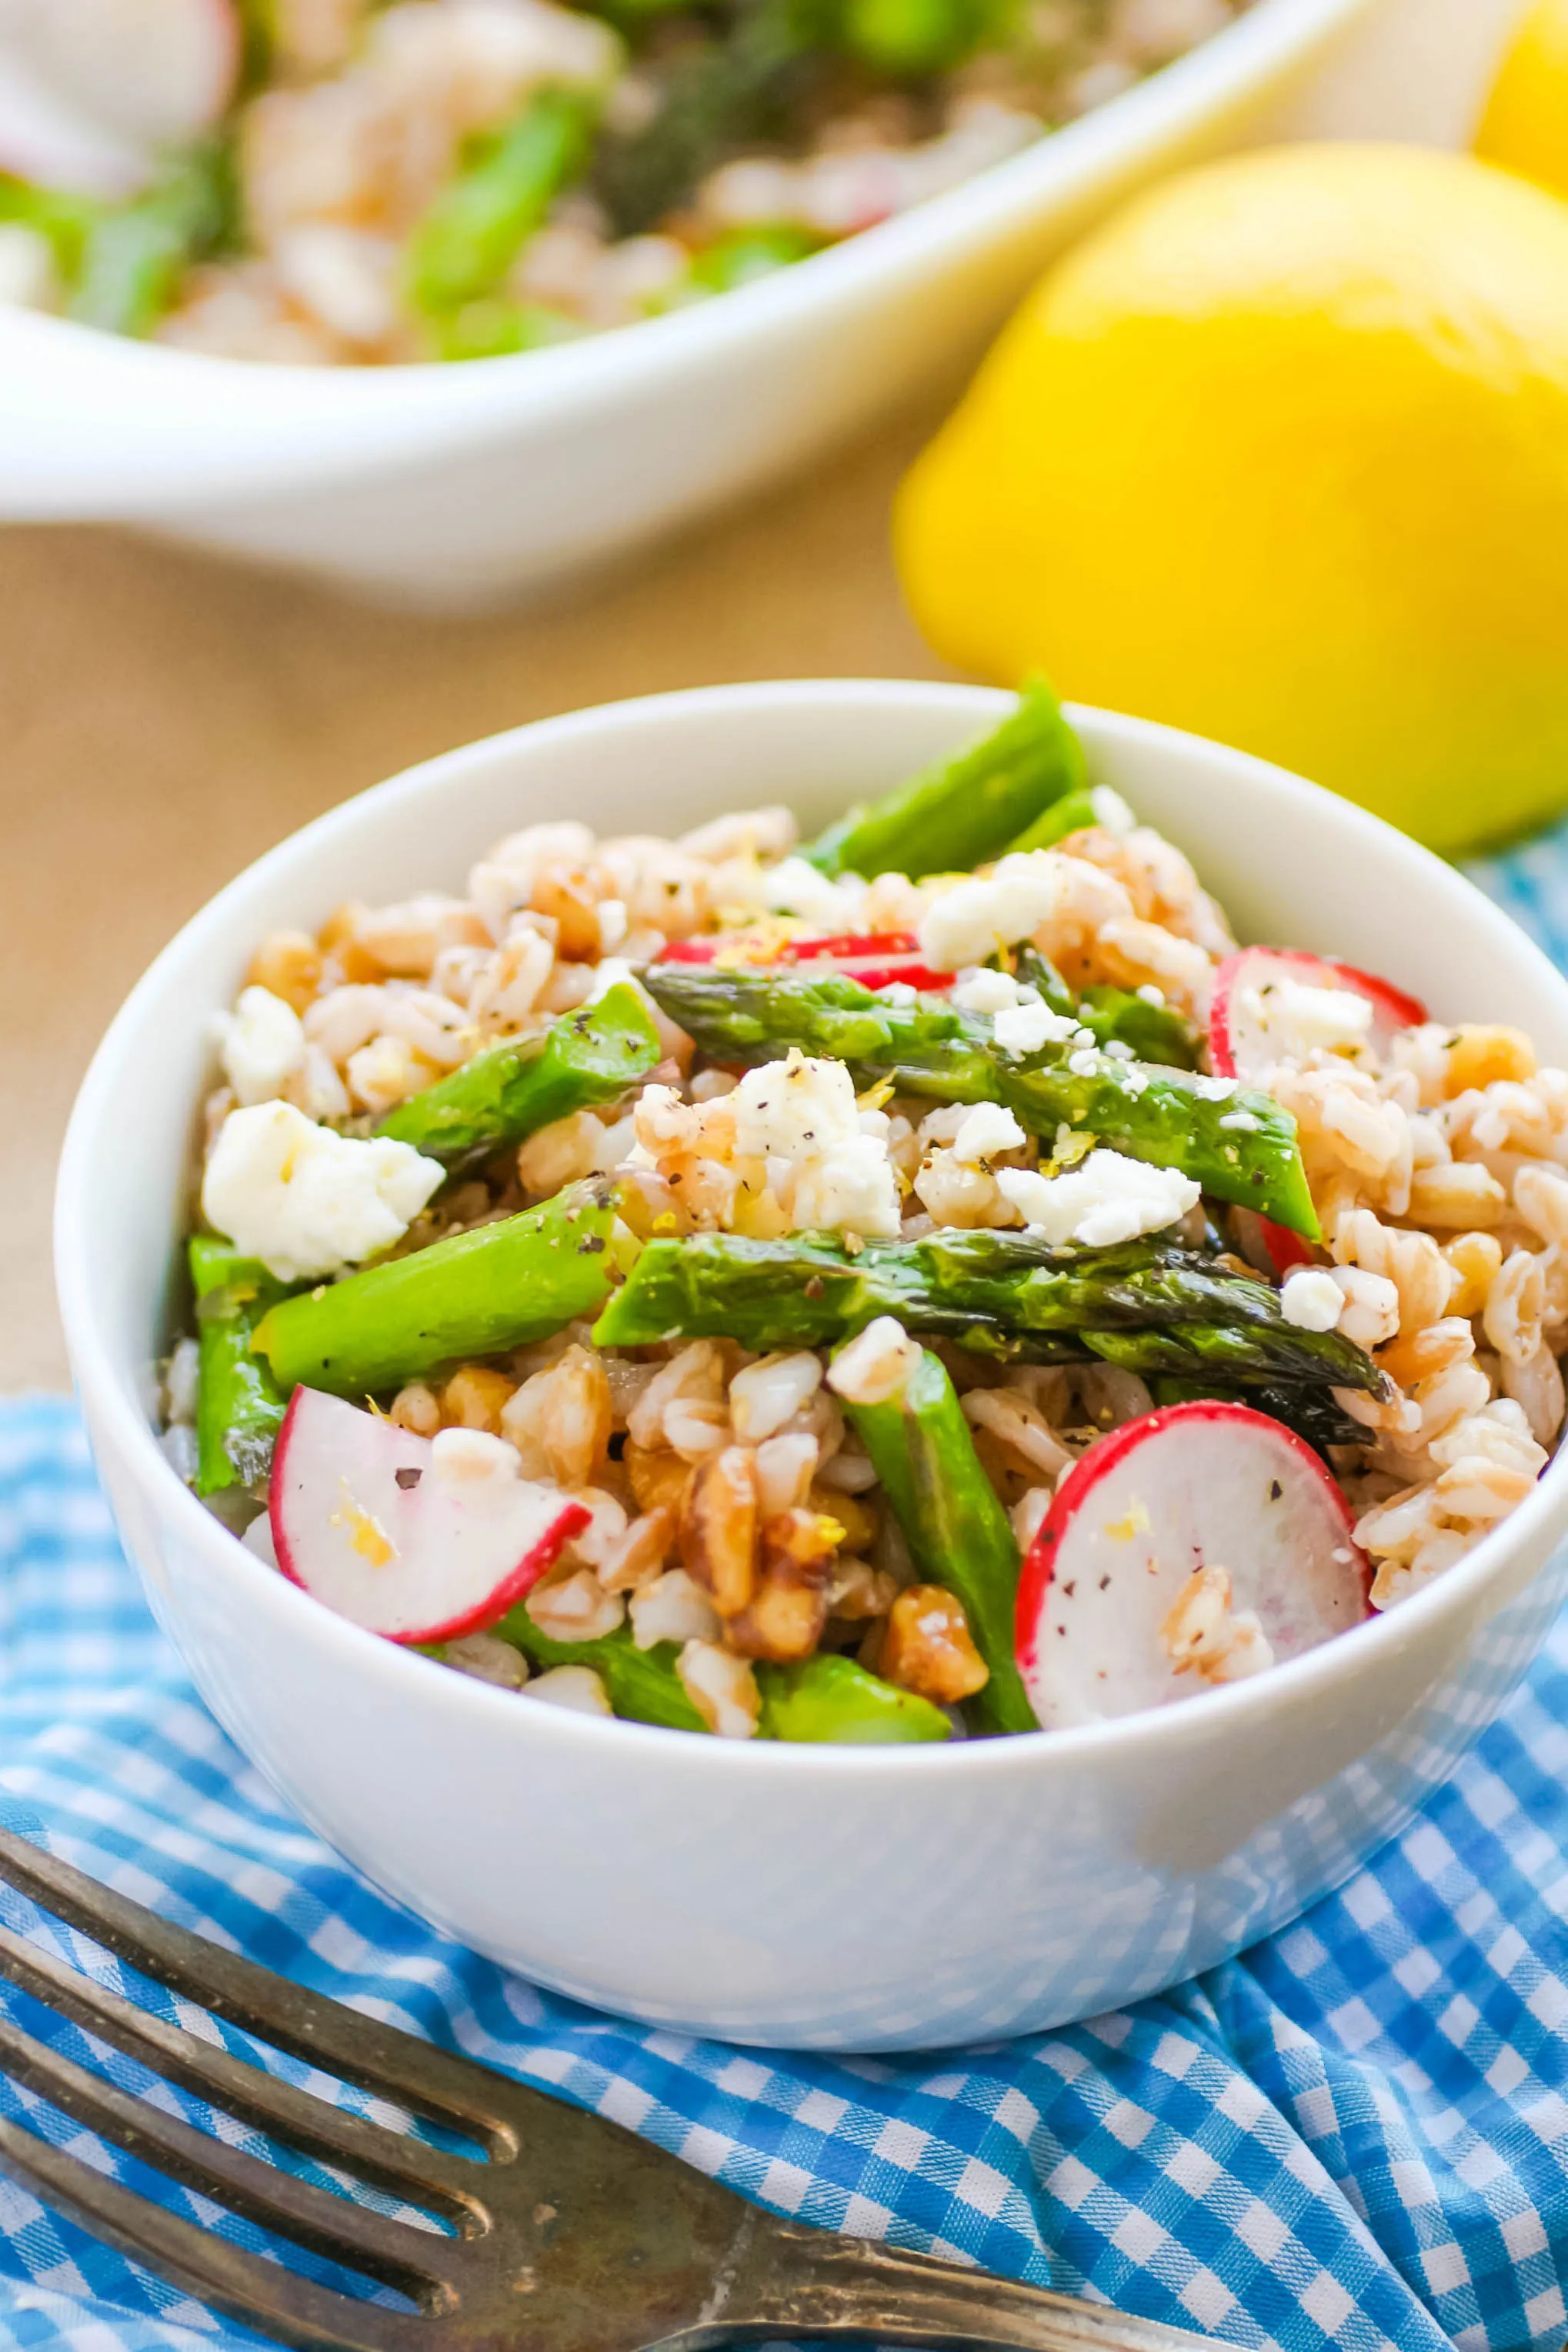 Farro Salad with Asparagus, Radishes & Lemon Vinaigrette is a lovely spring salad that's hearty, too. Farro Salad with Asparagus, Radishes & Lemon Vinaigrette is a delightfully hearty spring salad.